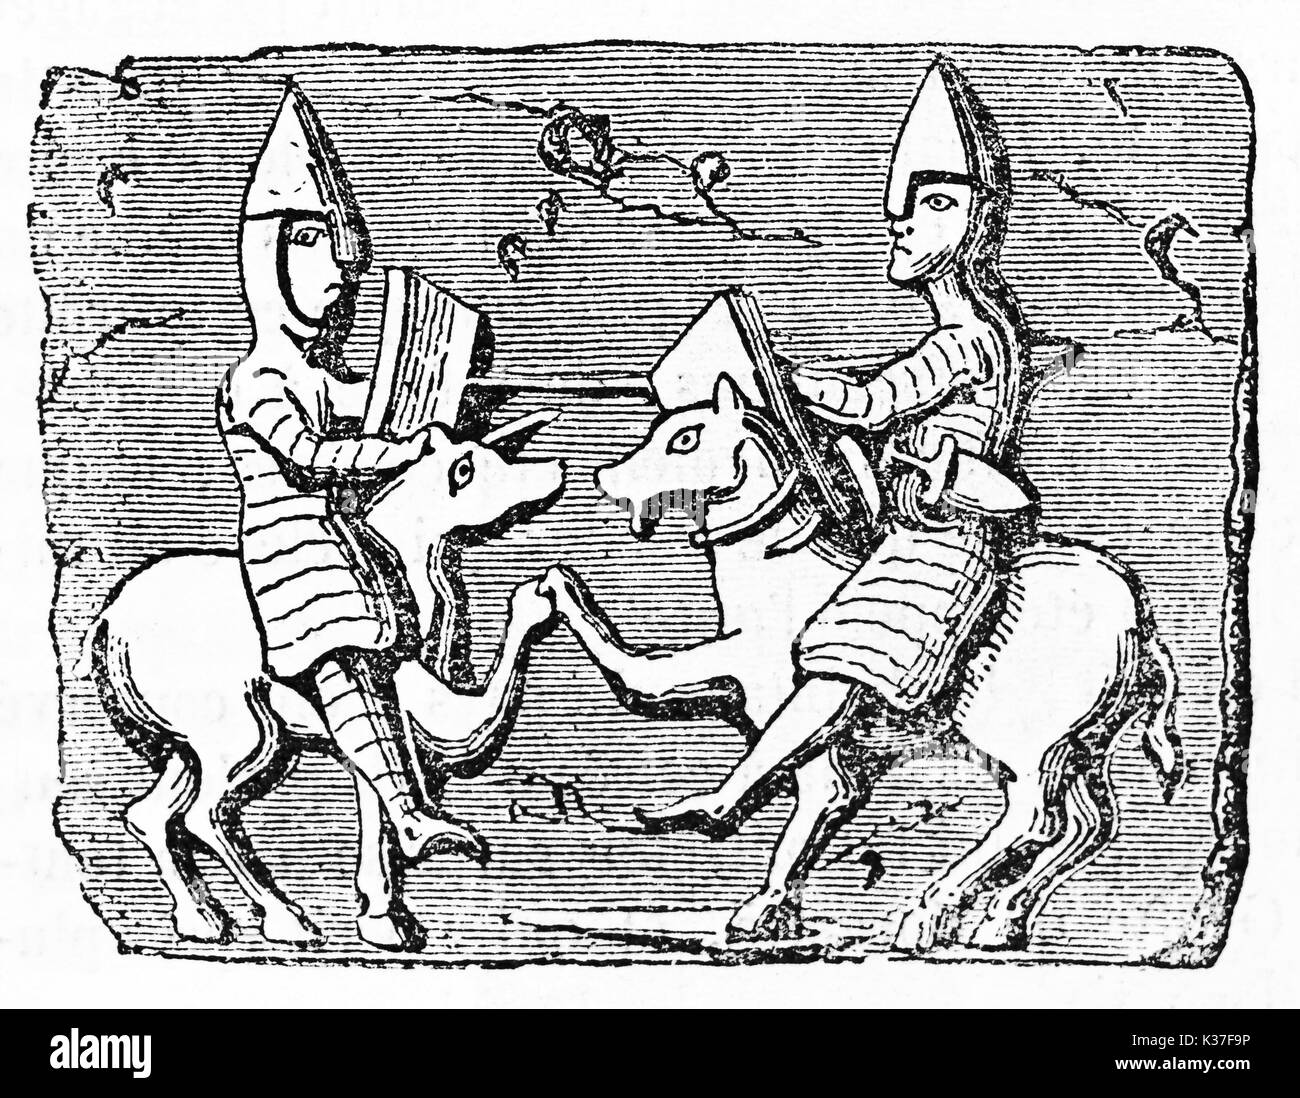 Ancient iconic image of two knight fighting on their horses depicted in side view opposite each other. Old Illustration by unidentified author published on Magasin Pittoresque Paris 1834 Stock Photo